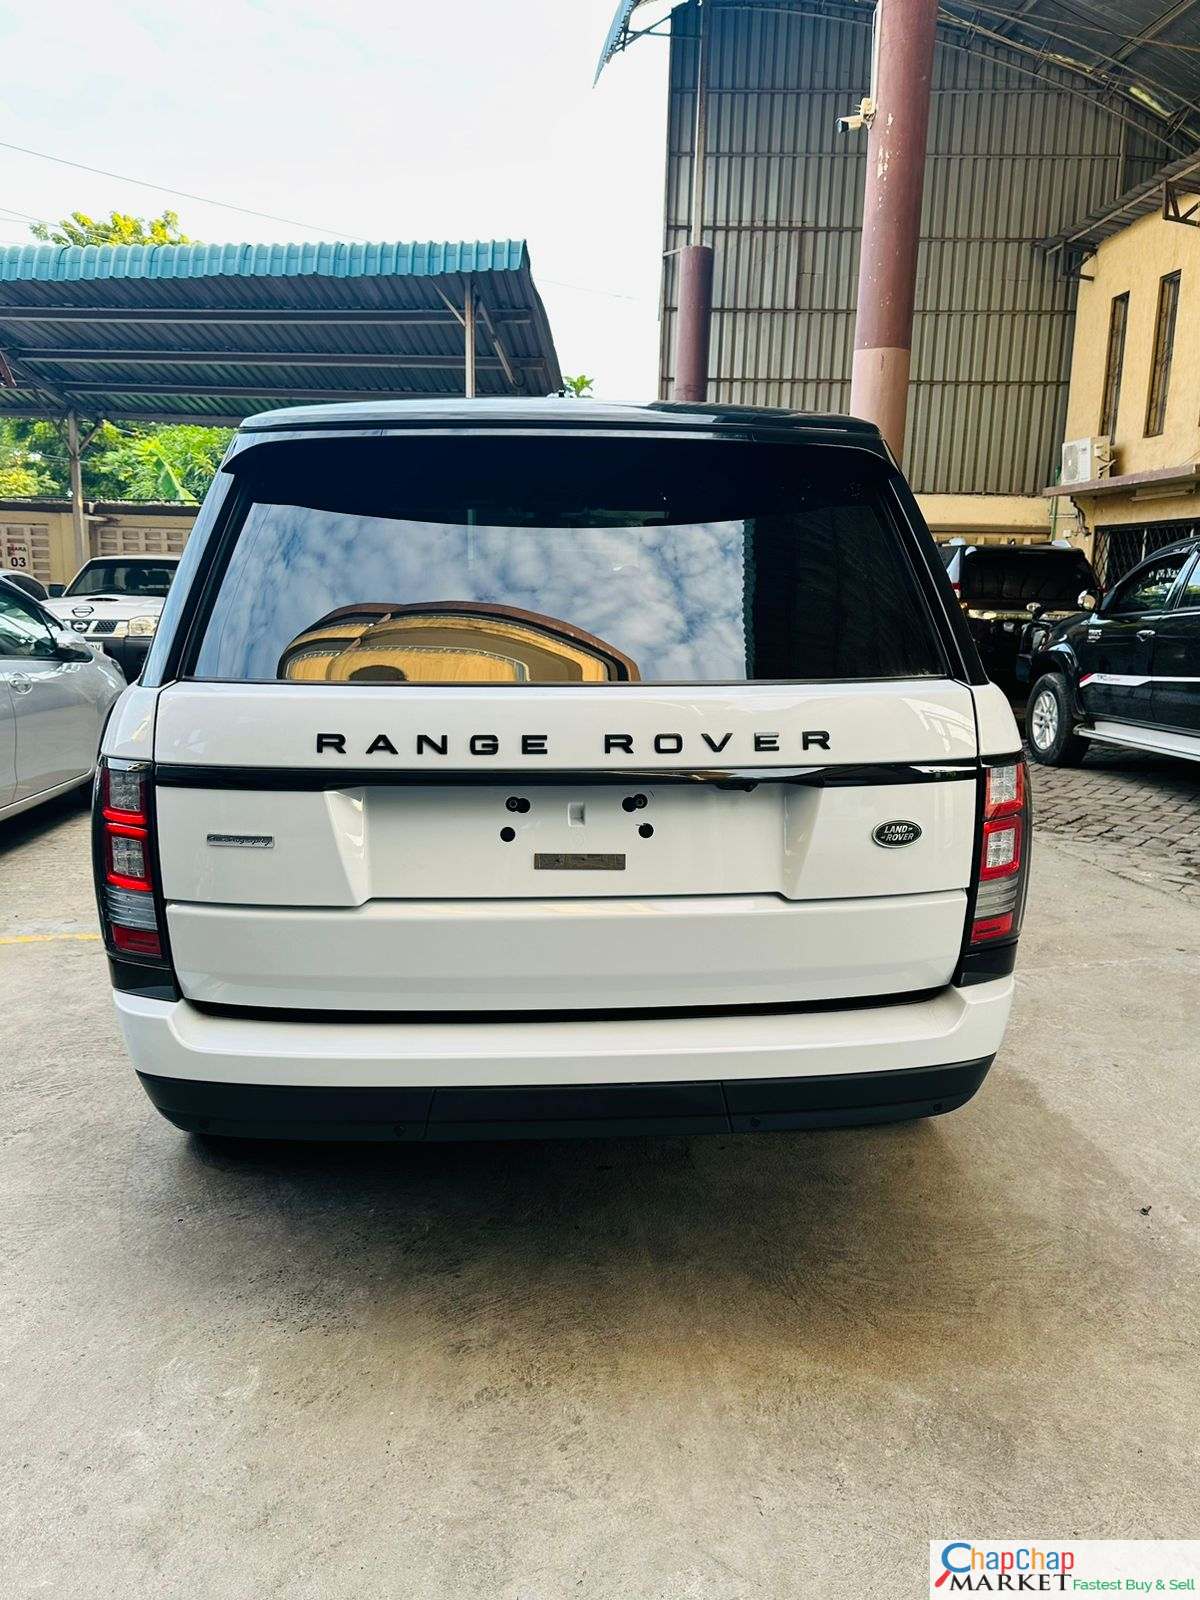 RANGE ROVER VOGUE Autobiography JUST ARRIVED QUICK SALE For sale in kenya exclusive